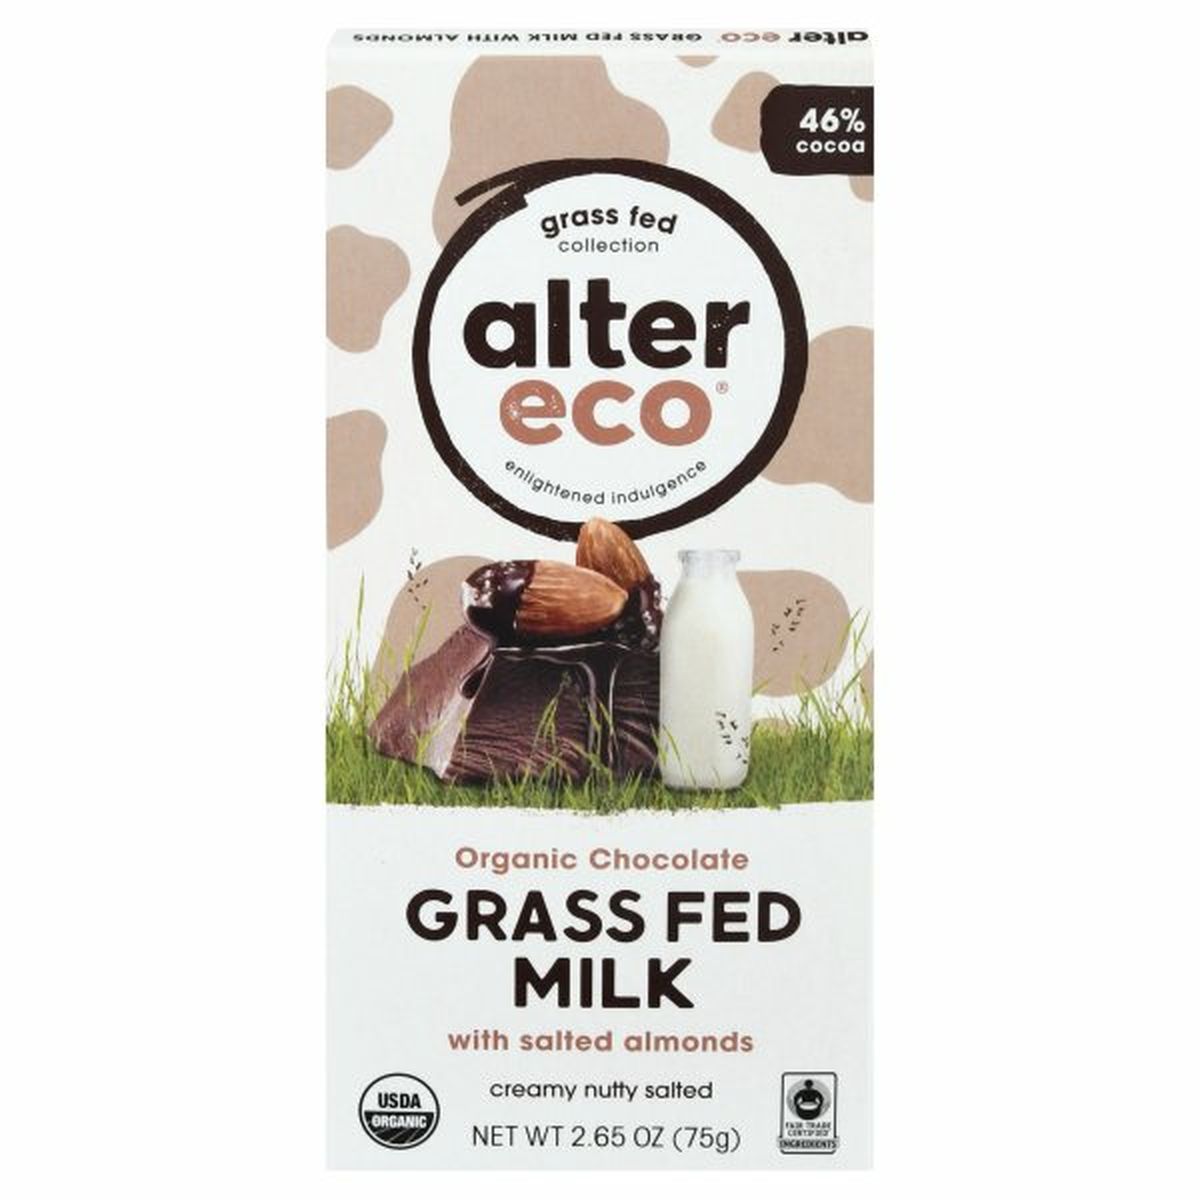 Calories in Alter Eco Chocolate, Organic, Grass Fed Milk with Salted Almonds, 46% Cocoa